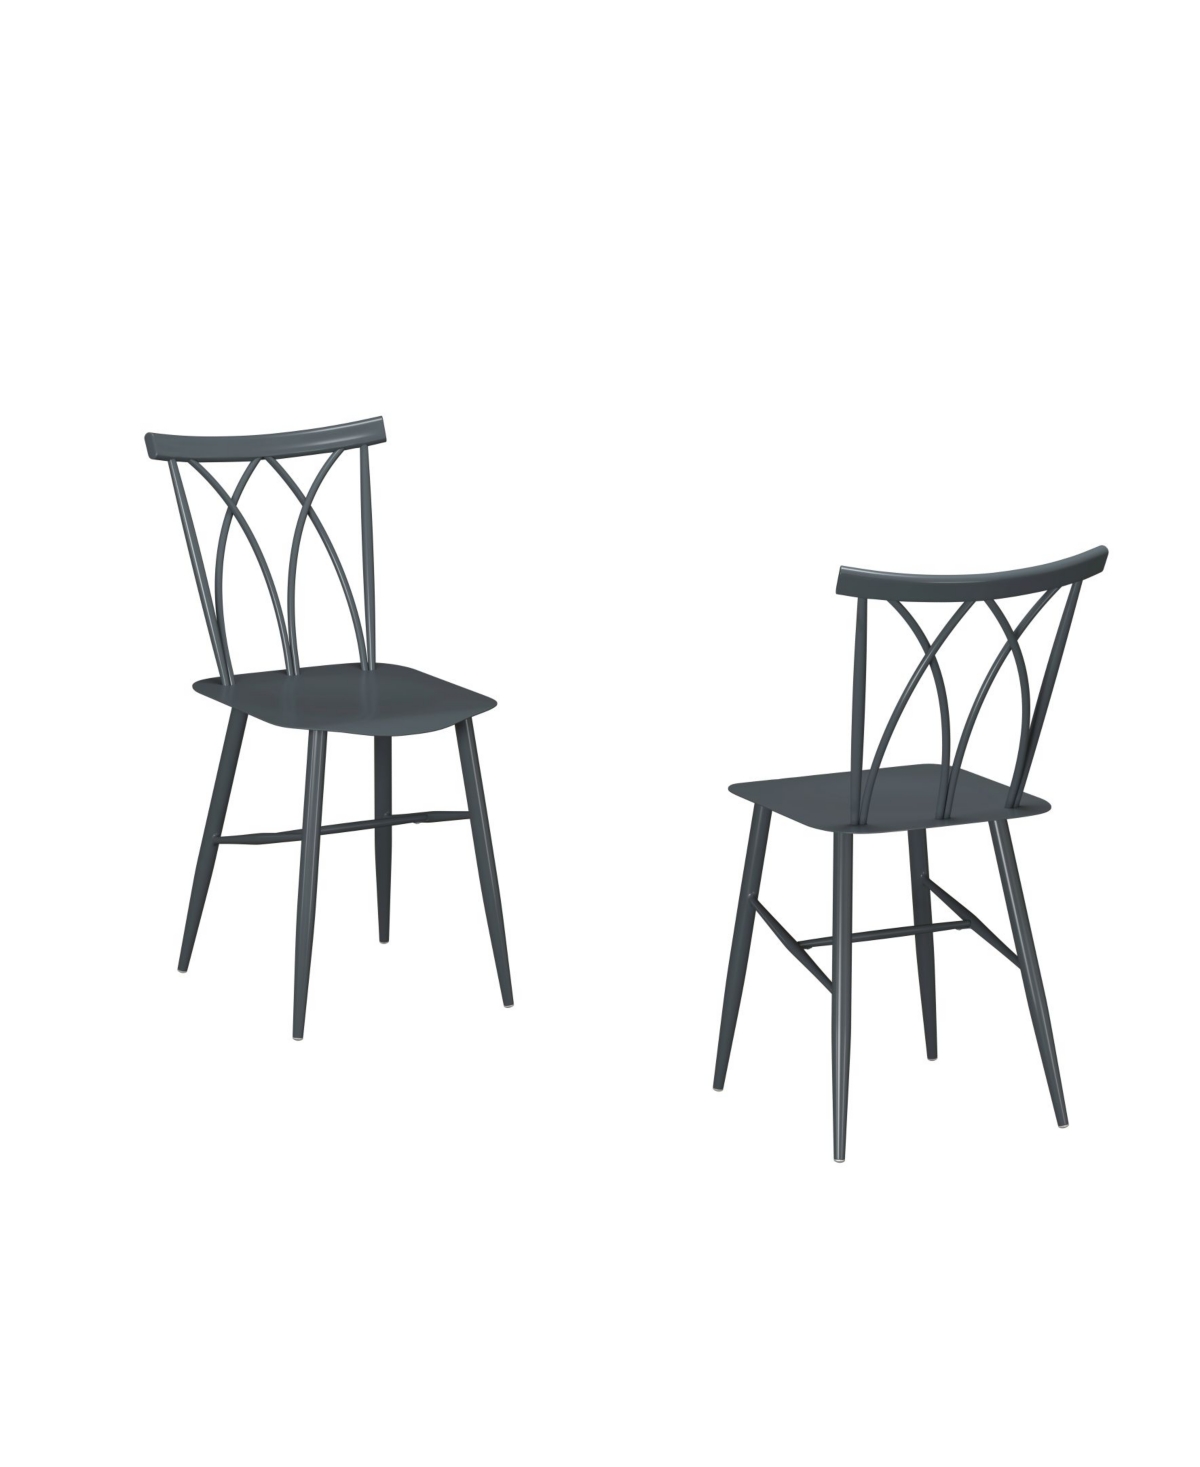 Lifestyle Solutions 15.7" 2 Piece Iron Lea Chair Set In Gray